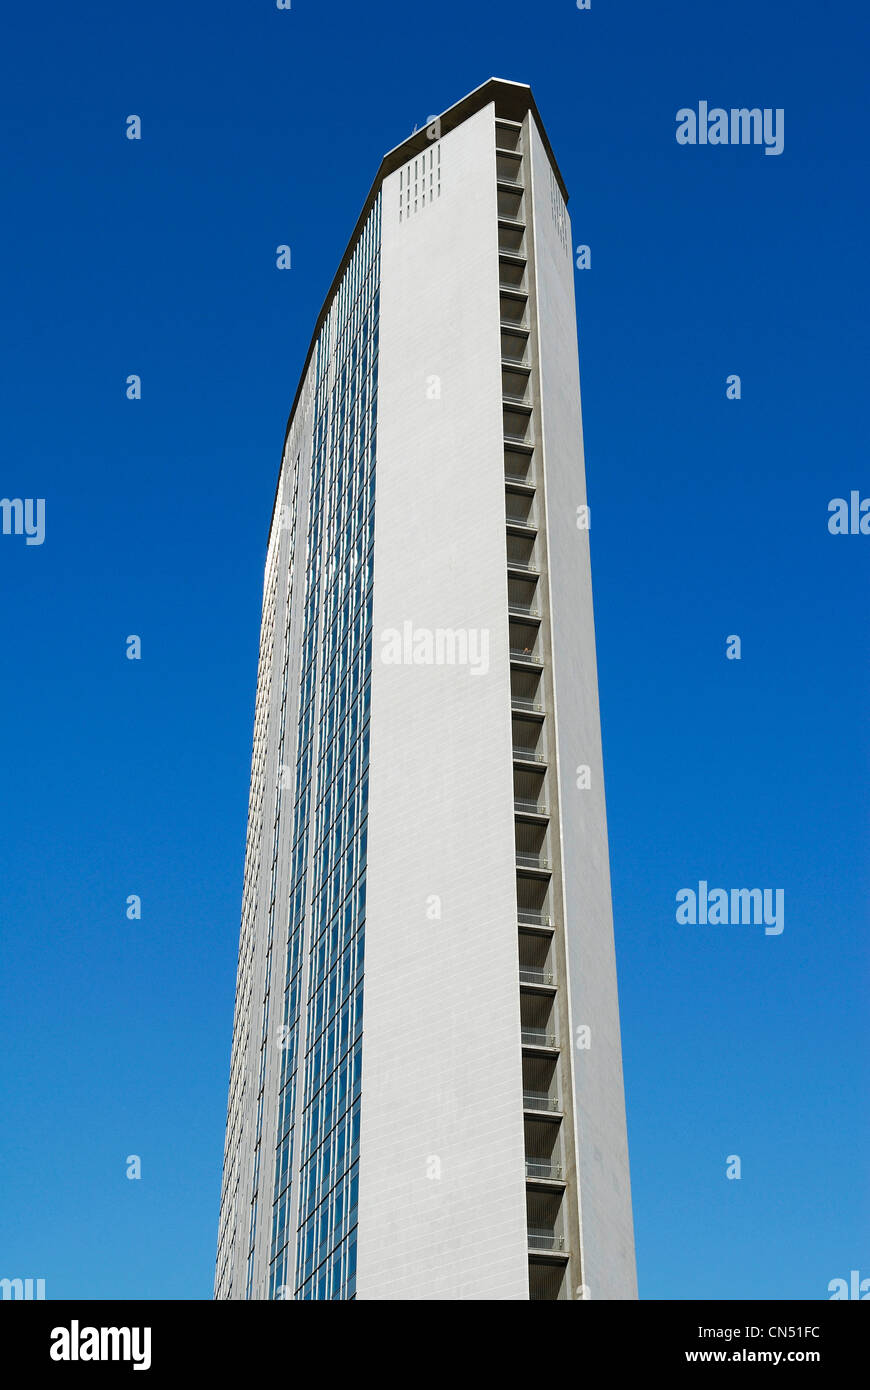 Italy, Lombardy, Milan, Pirelli Tower, called Pirellone, 127 metres tall, built between 1956 and 1961 by architect Gio Ponti Stock Photo